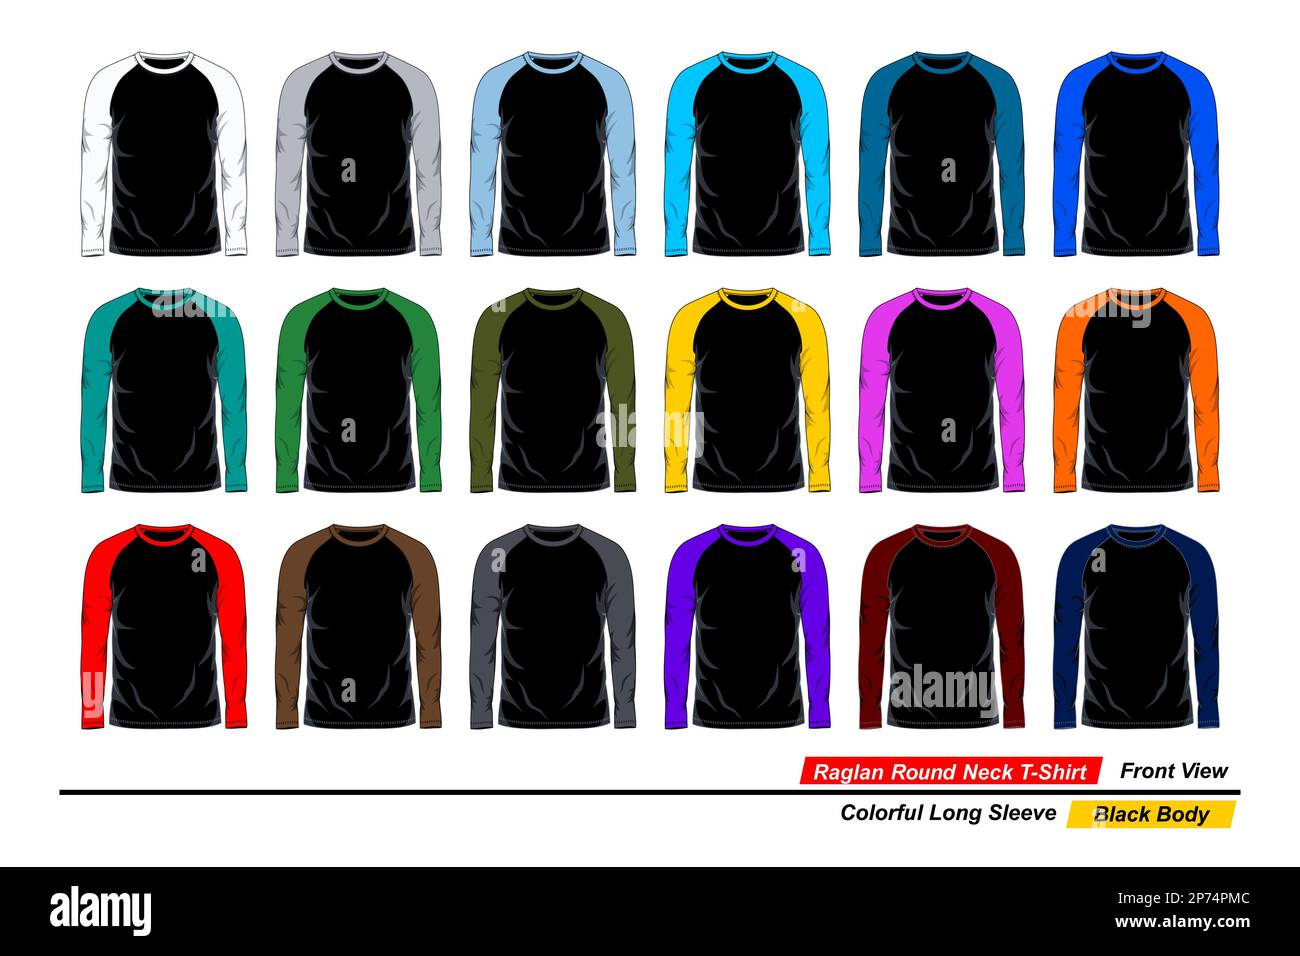 Raglan round neck t-shirt, front view, colorful long sleeve, black body ...